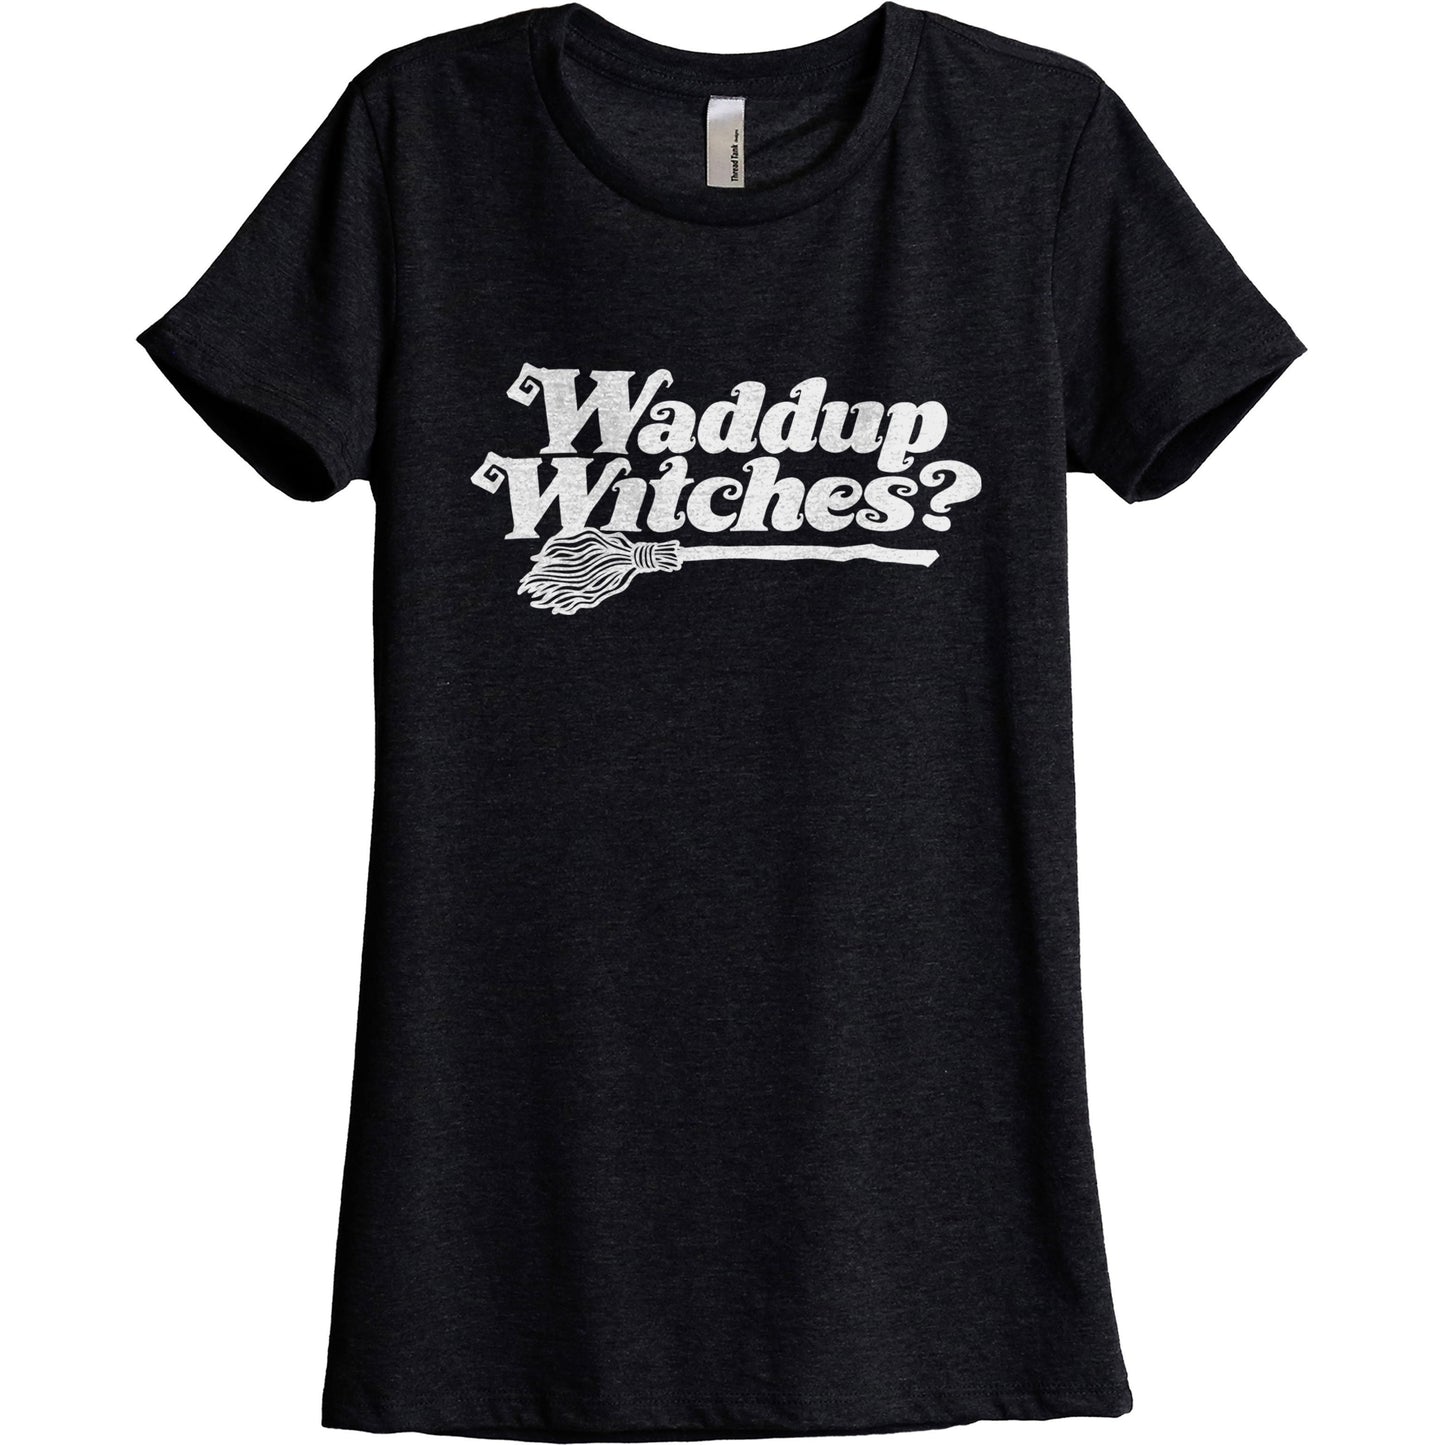 Waddup Witches? - thread tank | Stories you can wear.